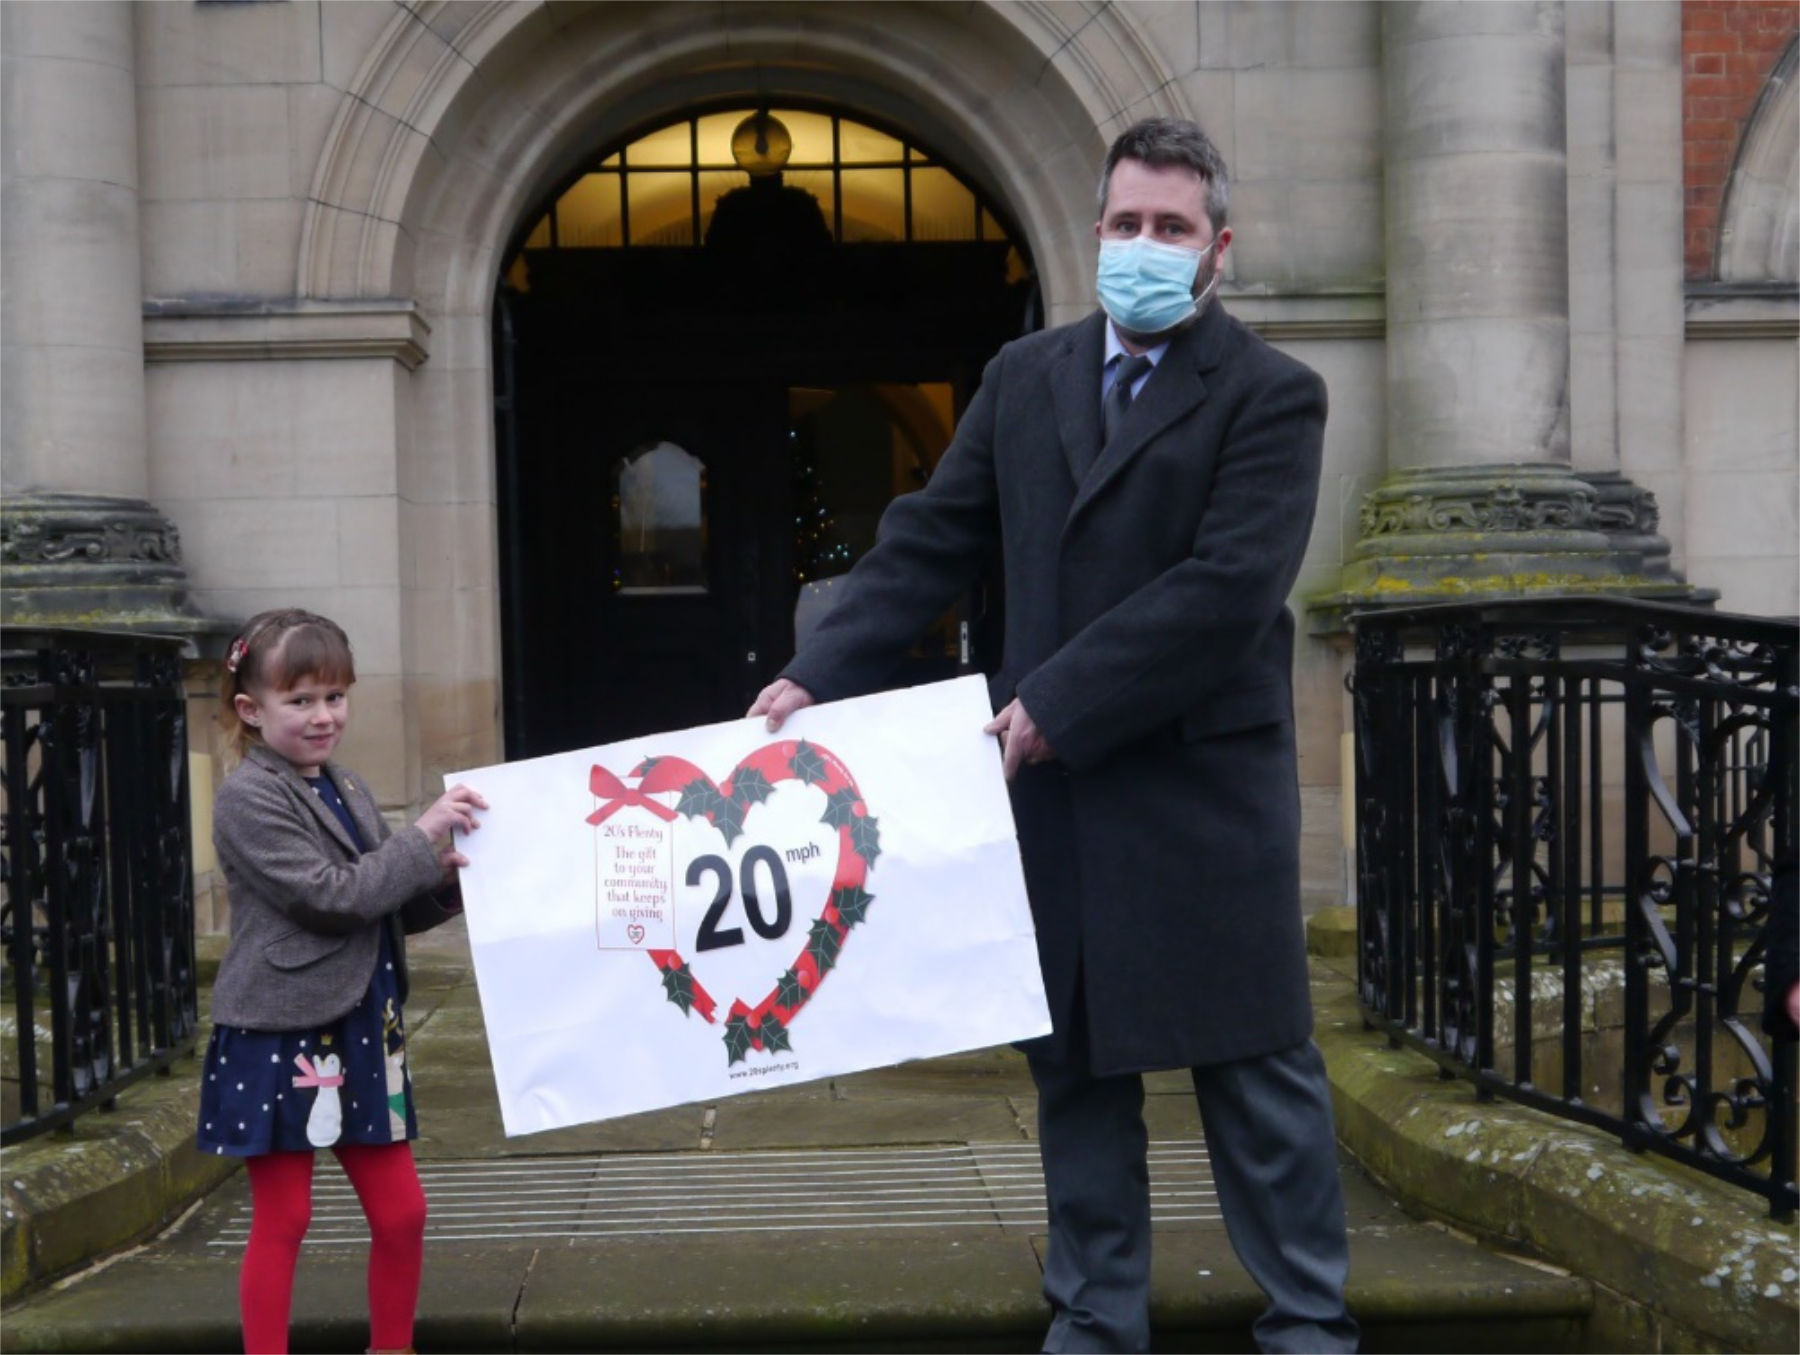 Last month, Poppy (aged 6) presented a Giant 20mph Christmas Card to Daniel Harry of Democratic Services at NYCC, on behalf of 56 Town and Parish Councils supporting the 20s Plenty default 20mph campaign.